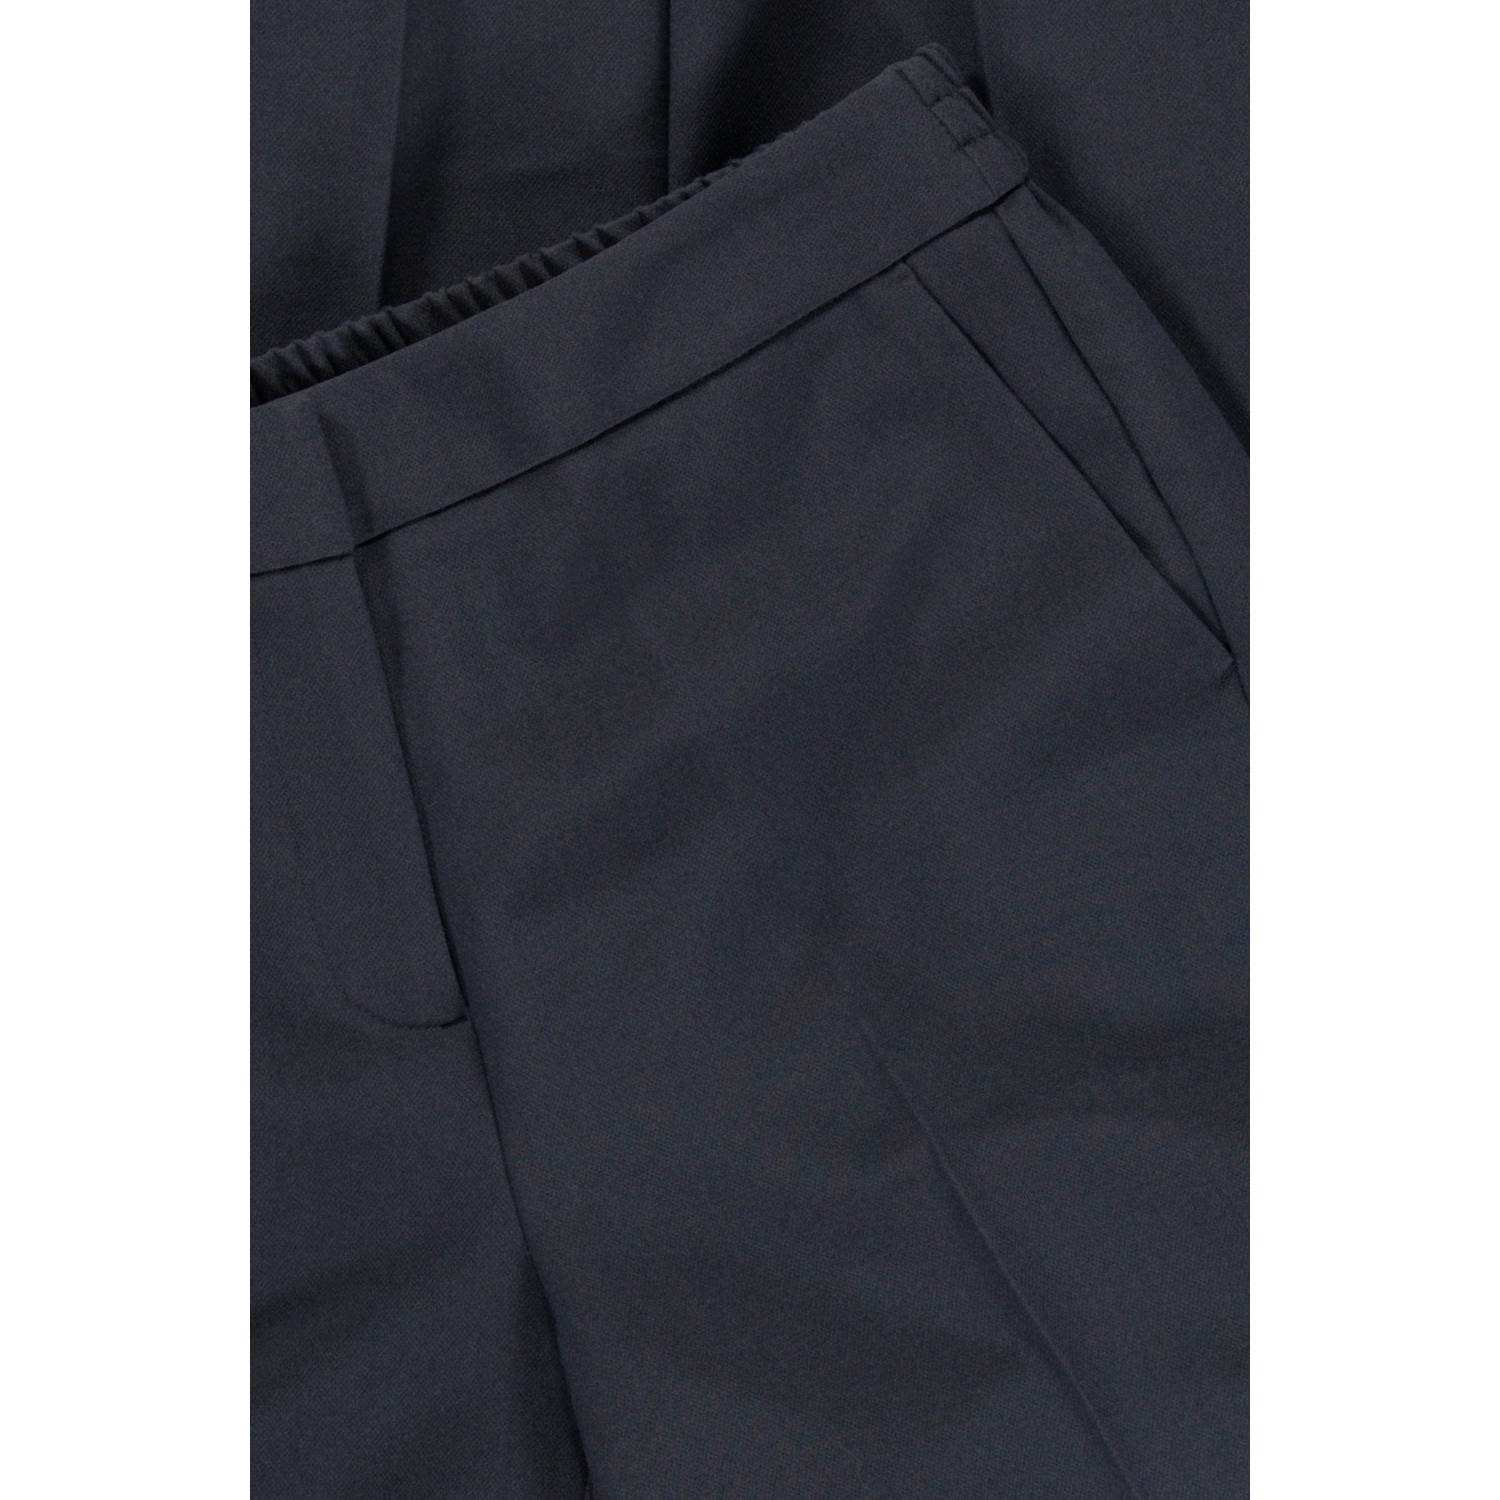 Expresso tapered fit pantalon donkerblauw